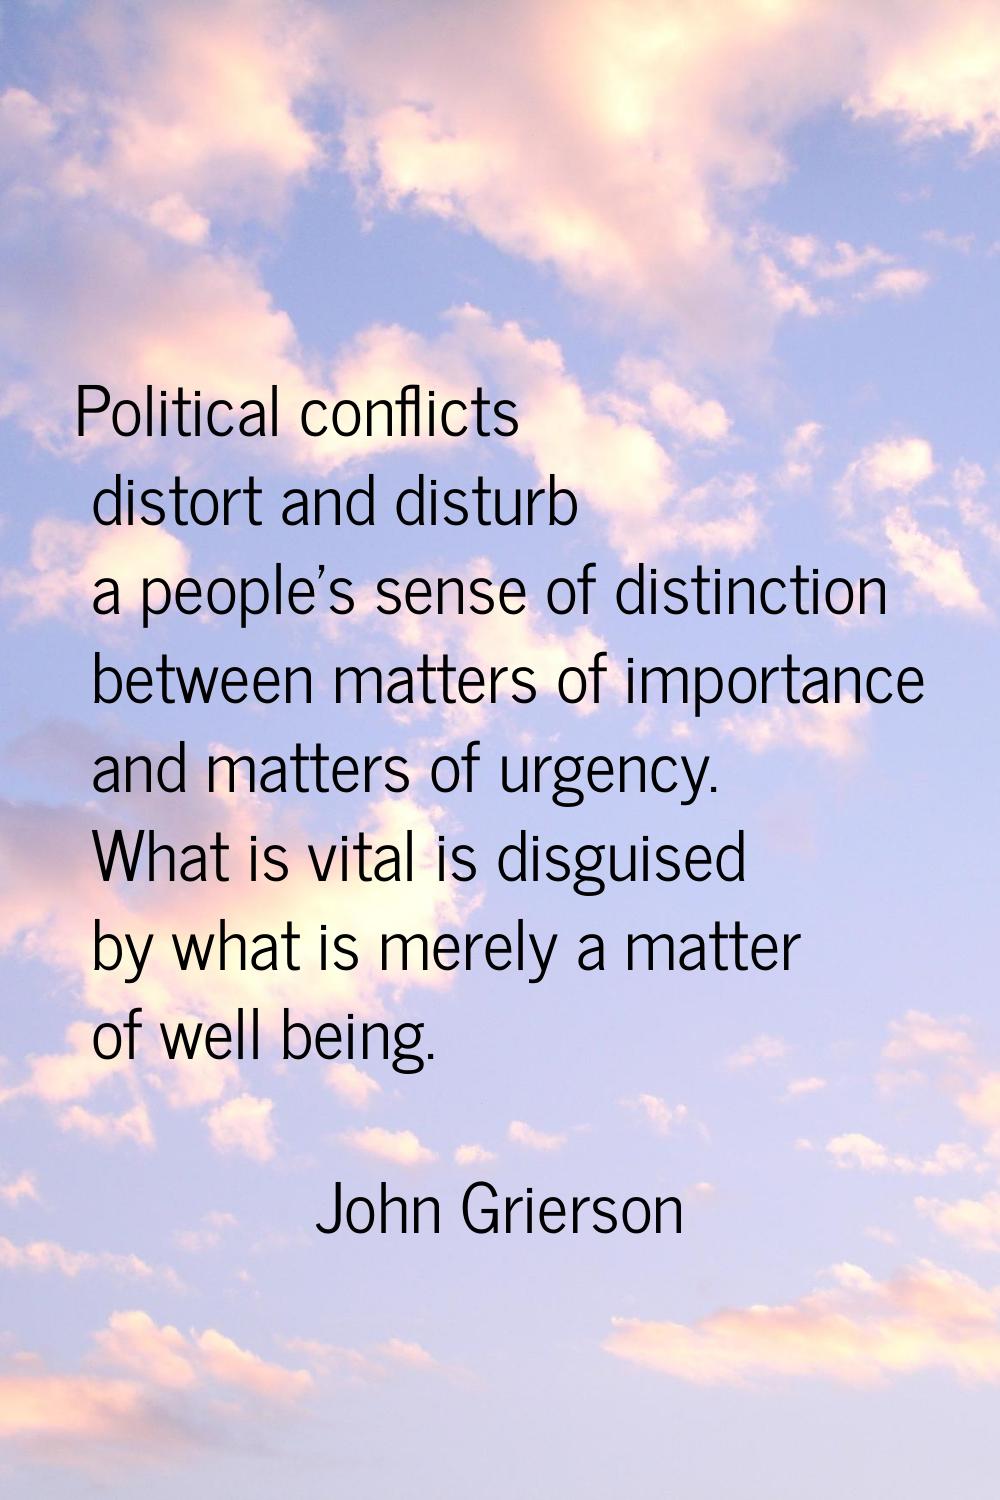 Political conflicts distort and disturb a people's sense of distinction between matters of importan